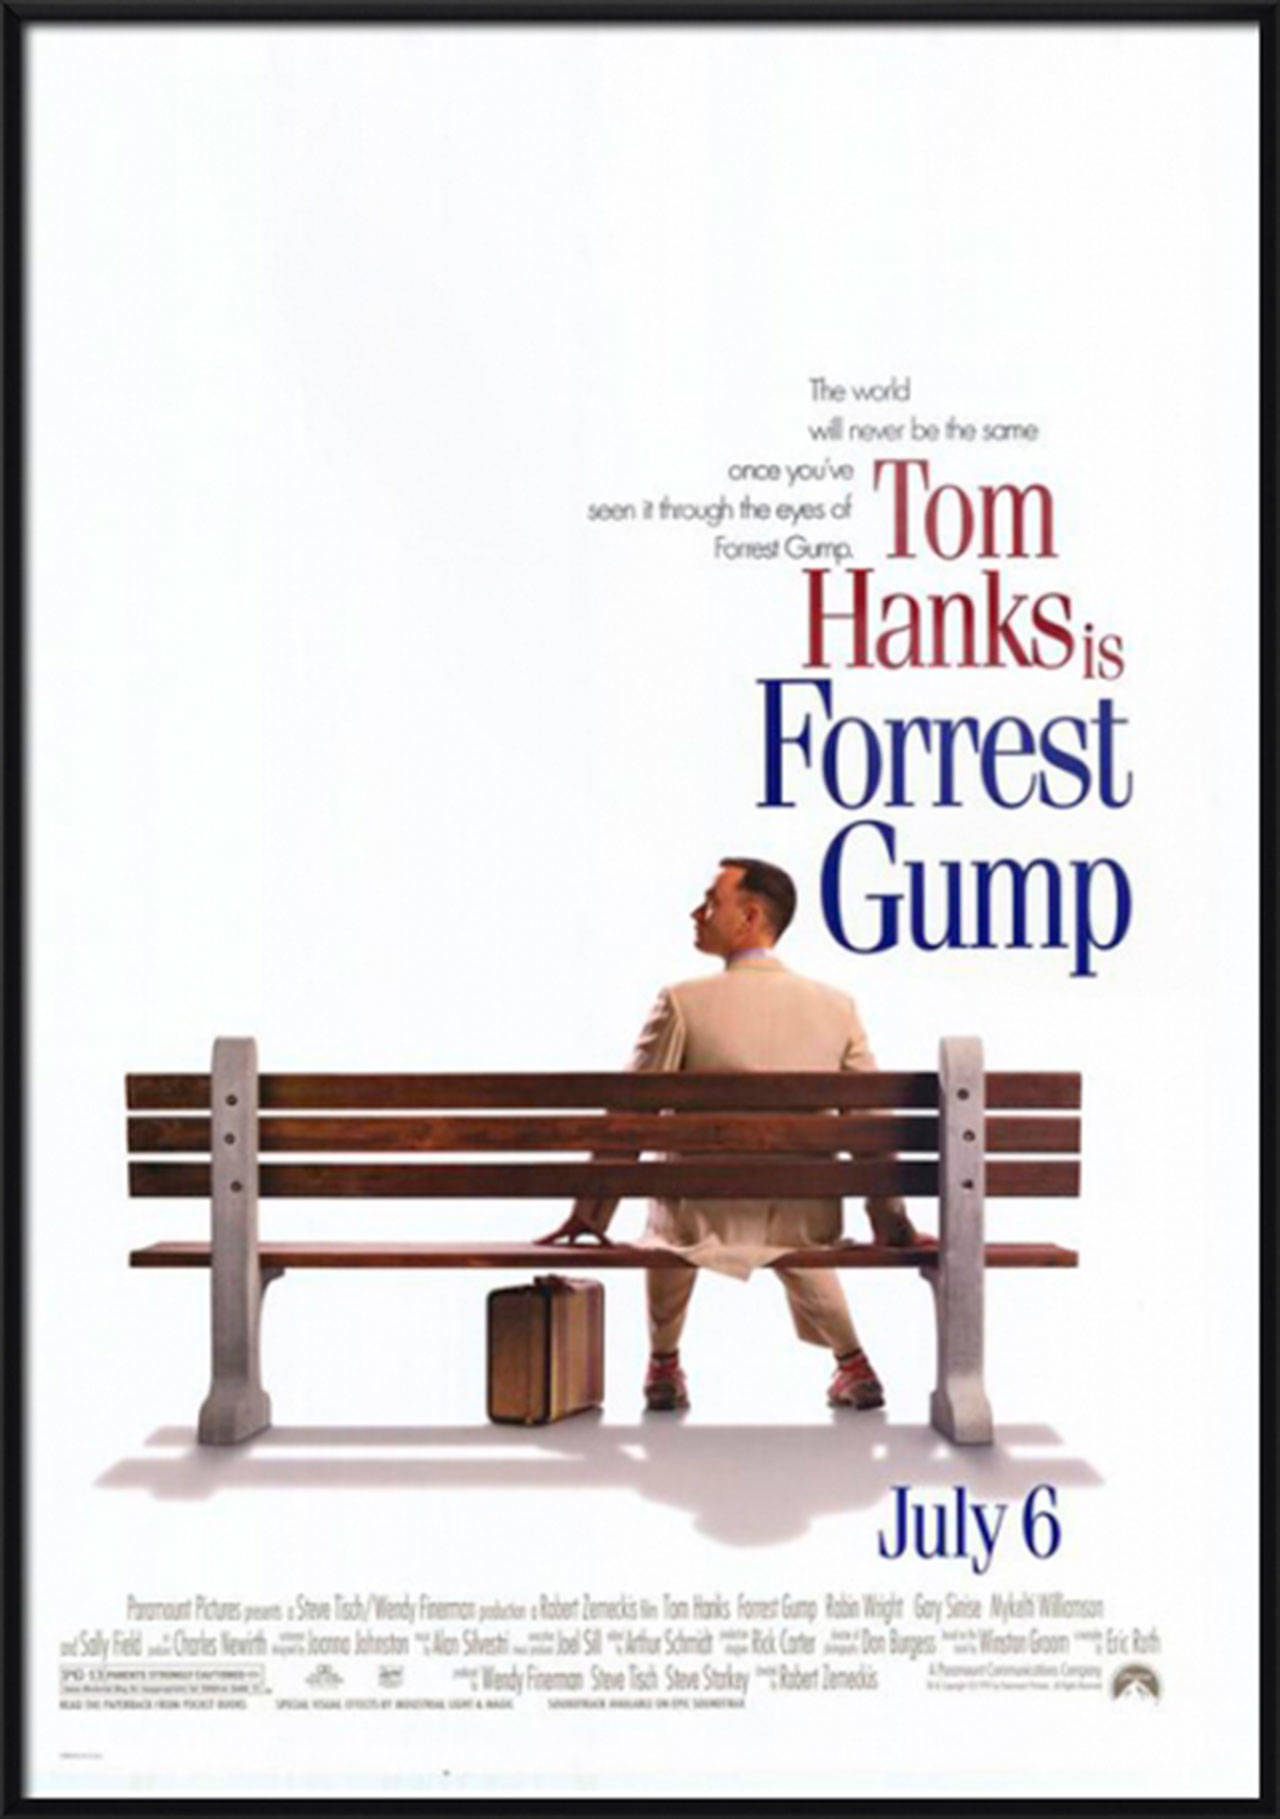 Image courtesy of Paramount Pictures | The award-winning historical comedy-drama “Forrest Gump” will return to the big screen at 7 p.m. Sunday, June 23 for a special 25th anniversary screening at Bainbridge Cinemas.